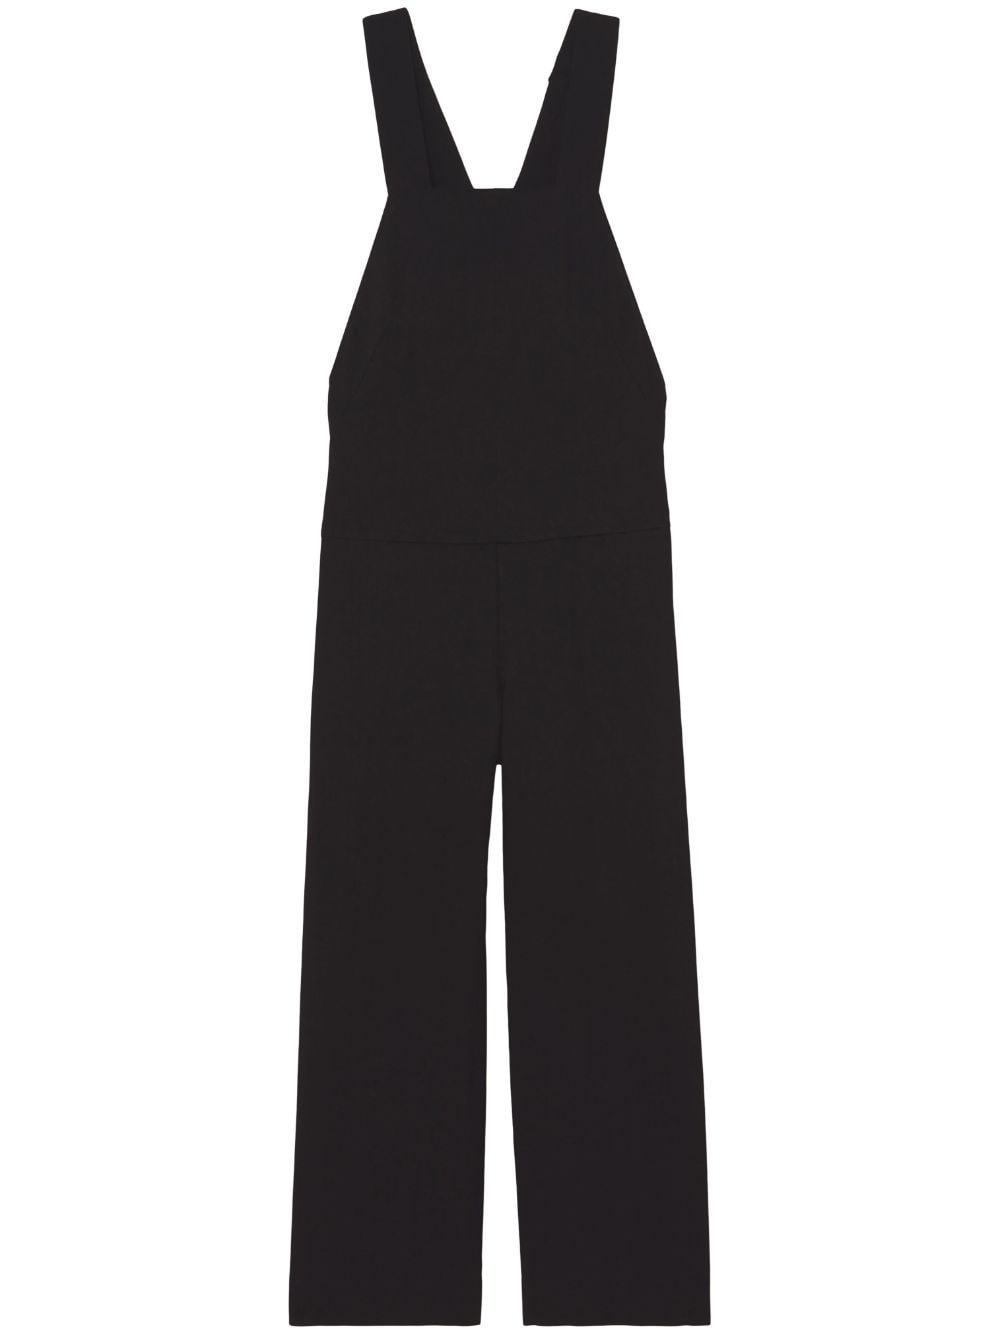 Proenza Schouler White Label draped suiting wide-leg jumpsuit - Black von Proenza Schouler White Label